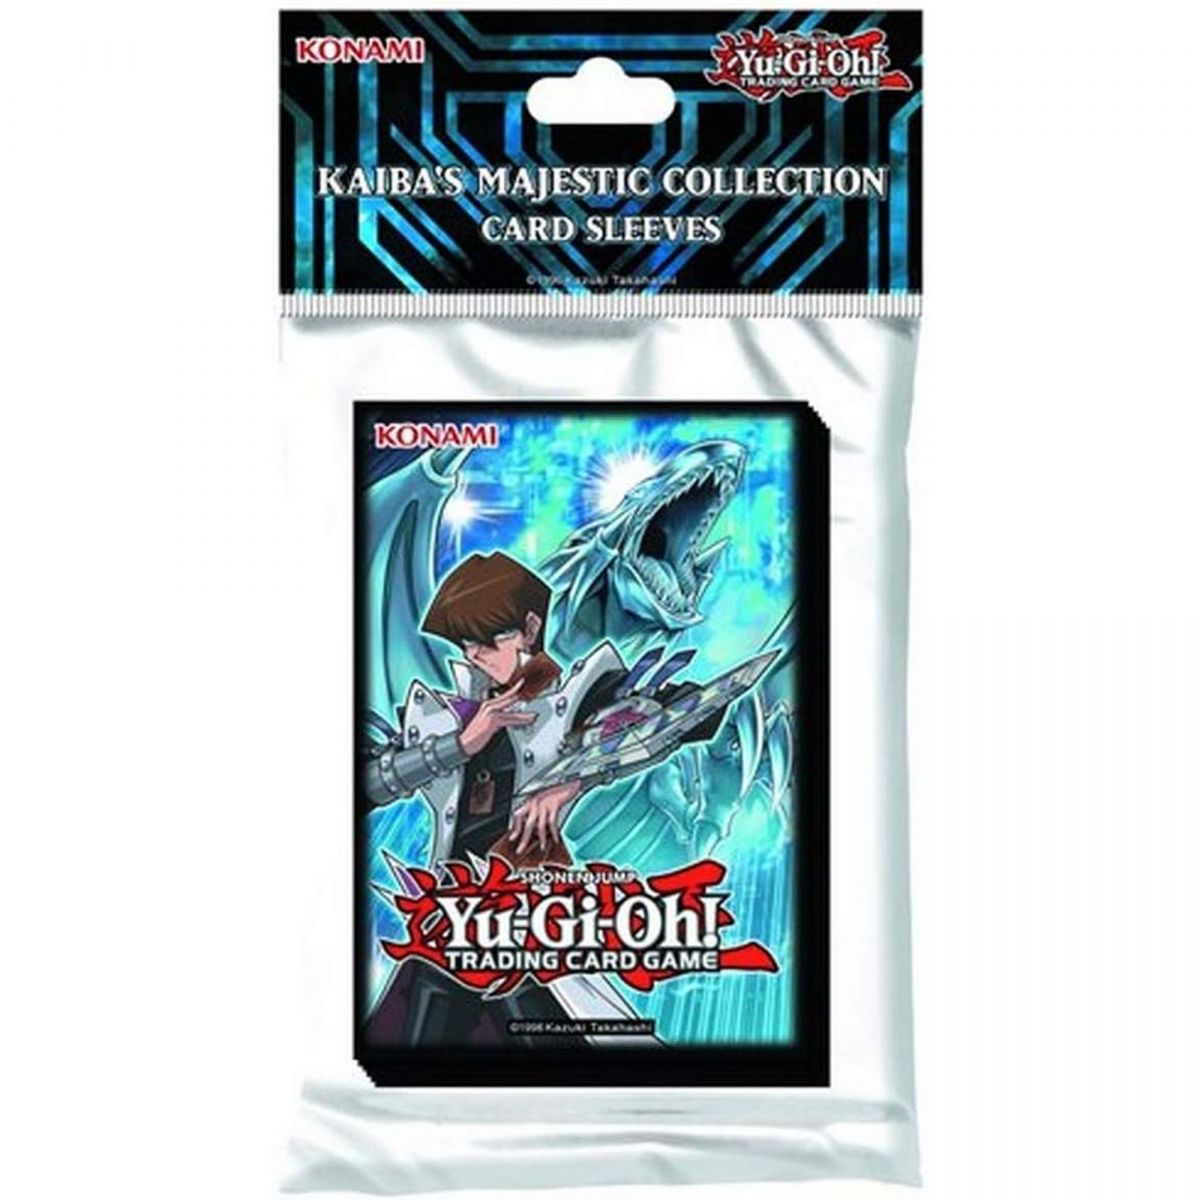 Item Yu Gi Oh! Kaiba's Majestic Collection Card Sleeves (50ct)